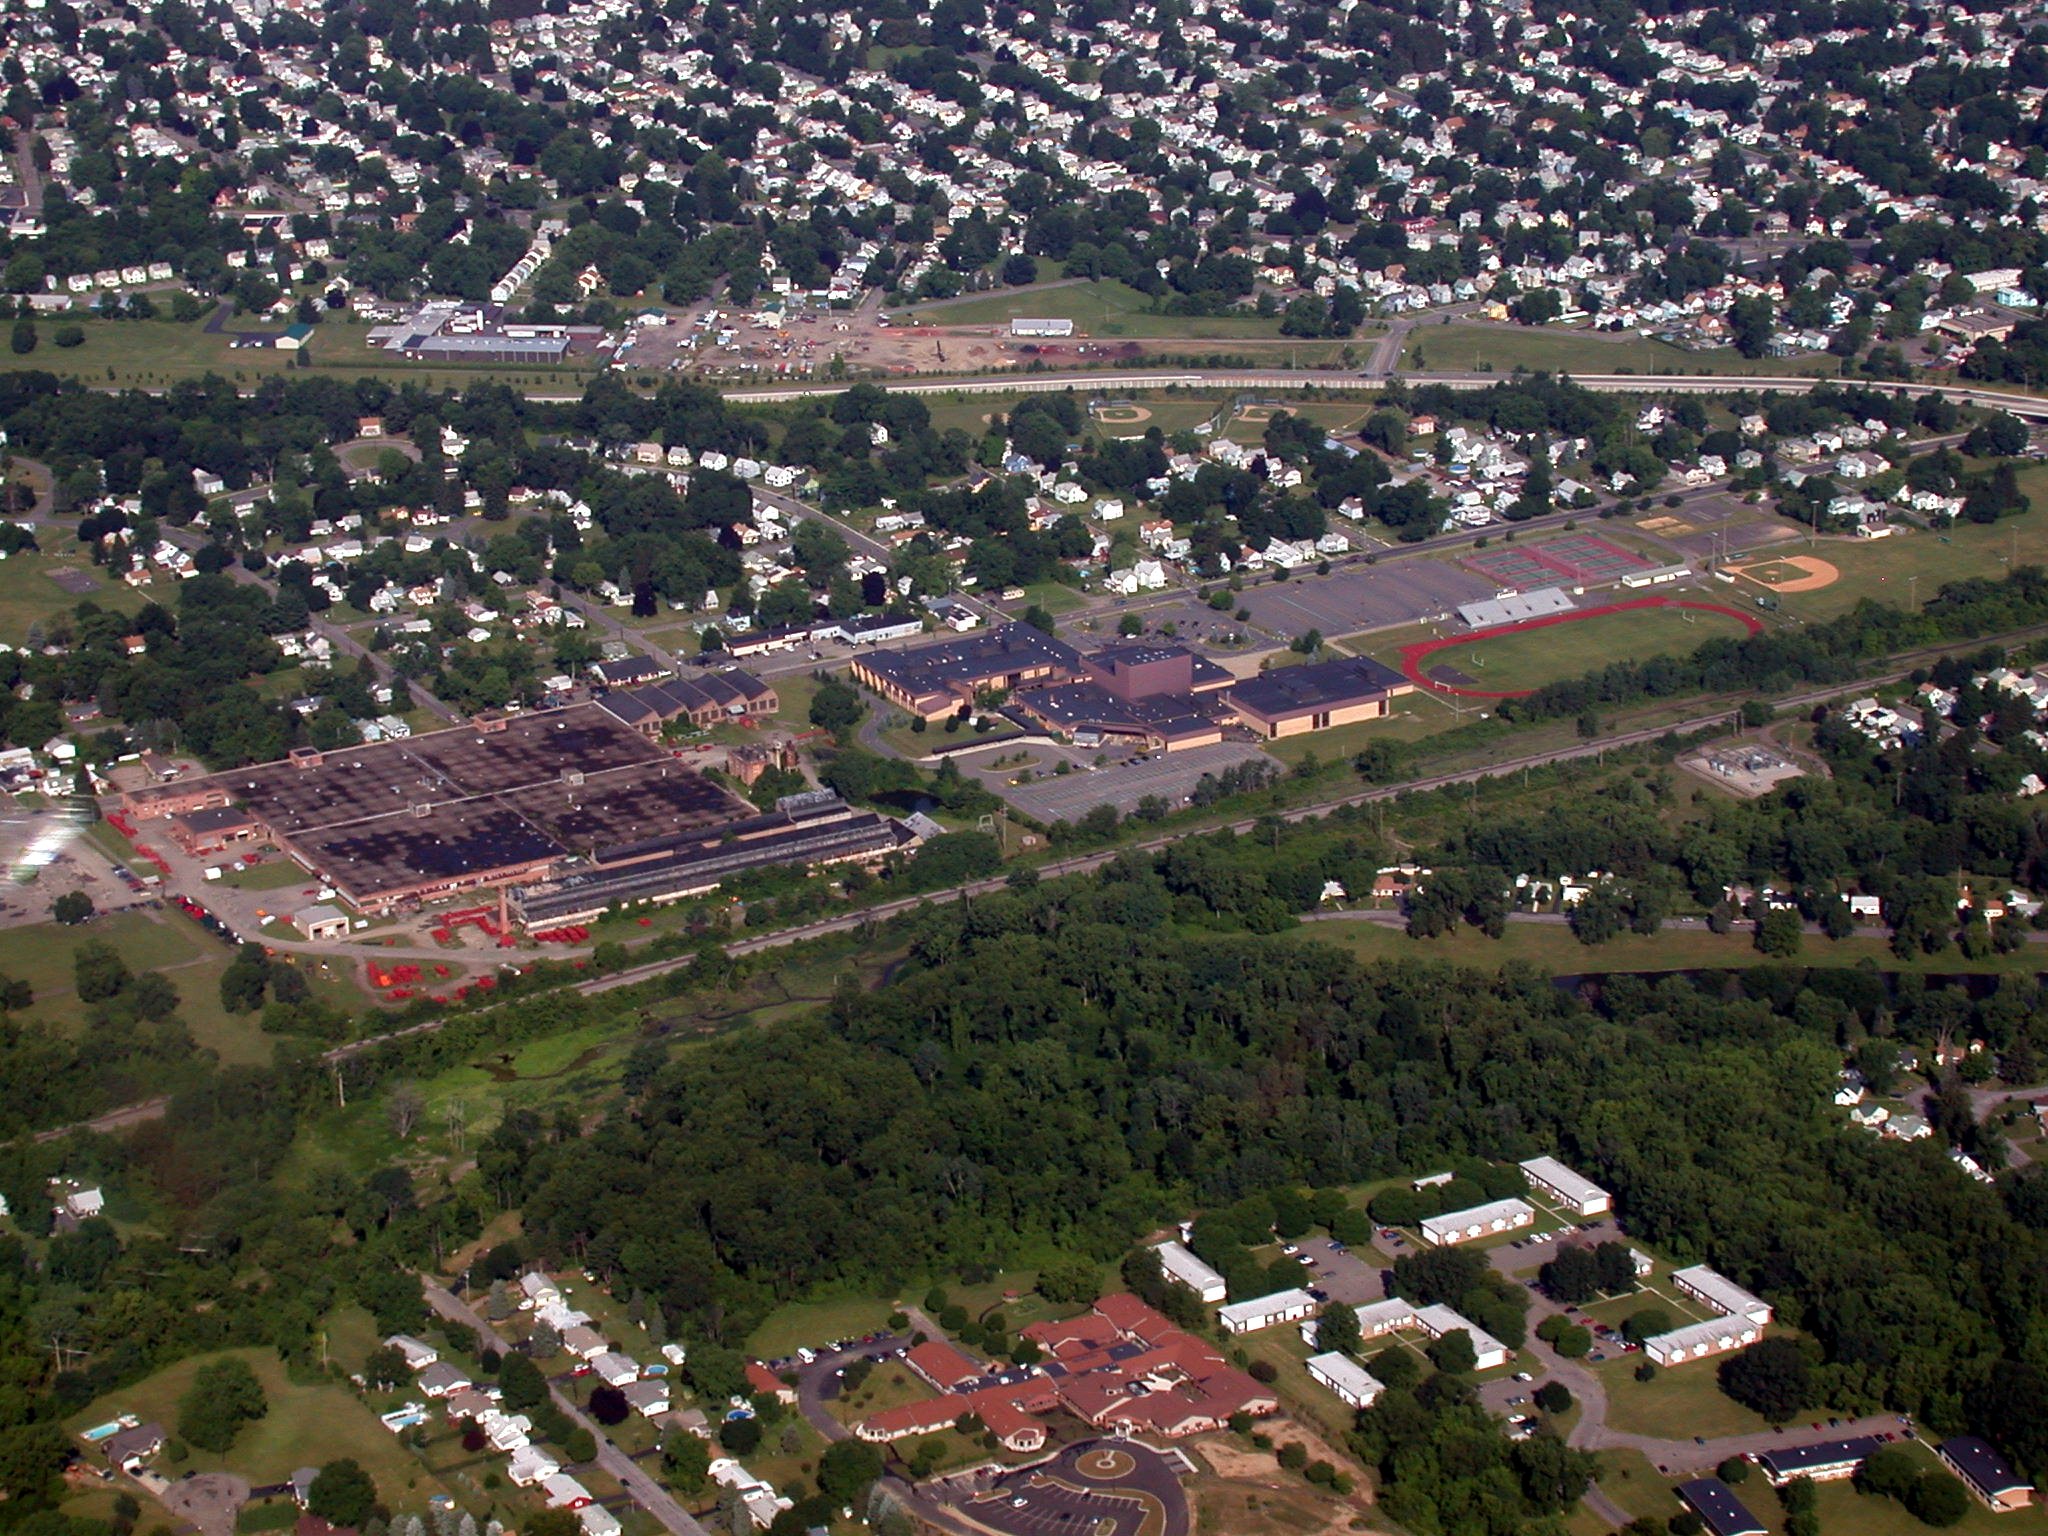 SHS again and the old Remington Rand plant